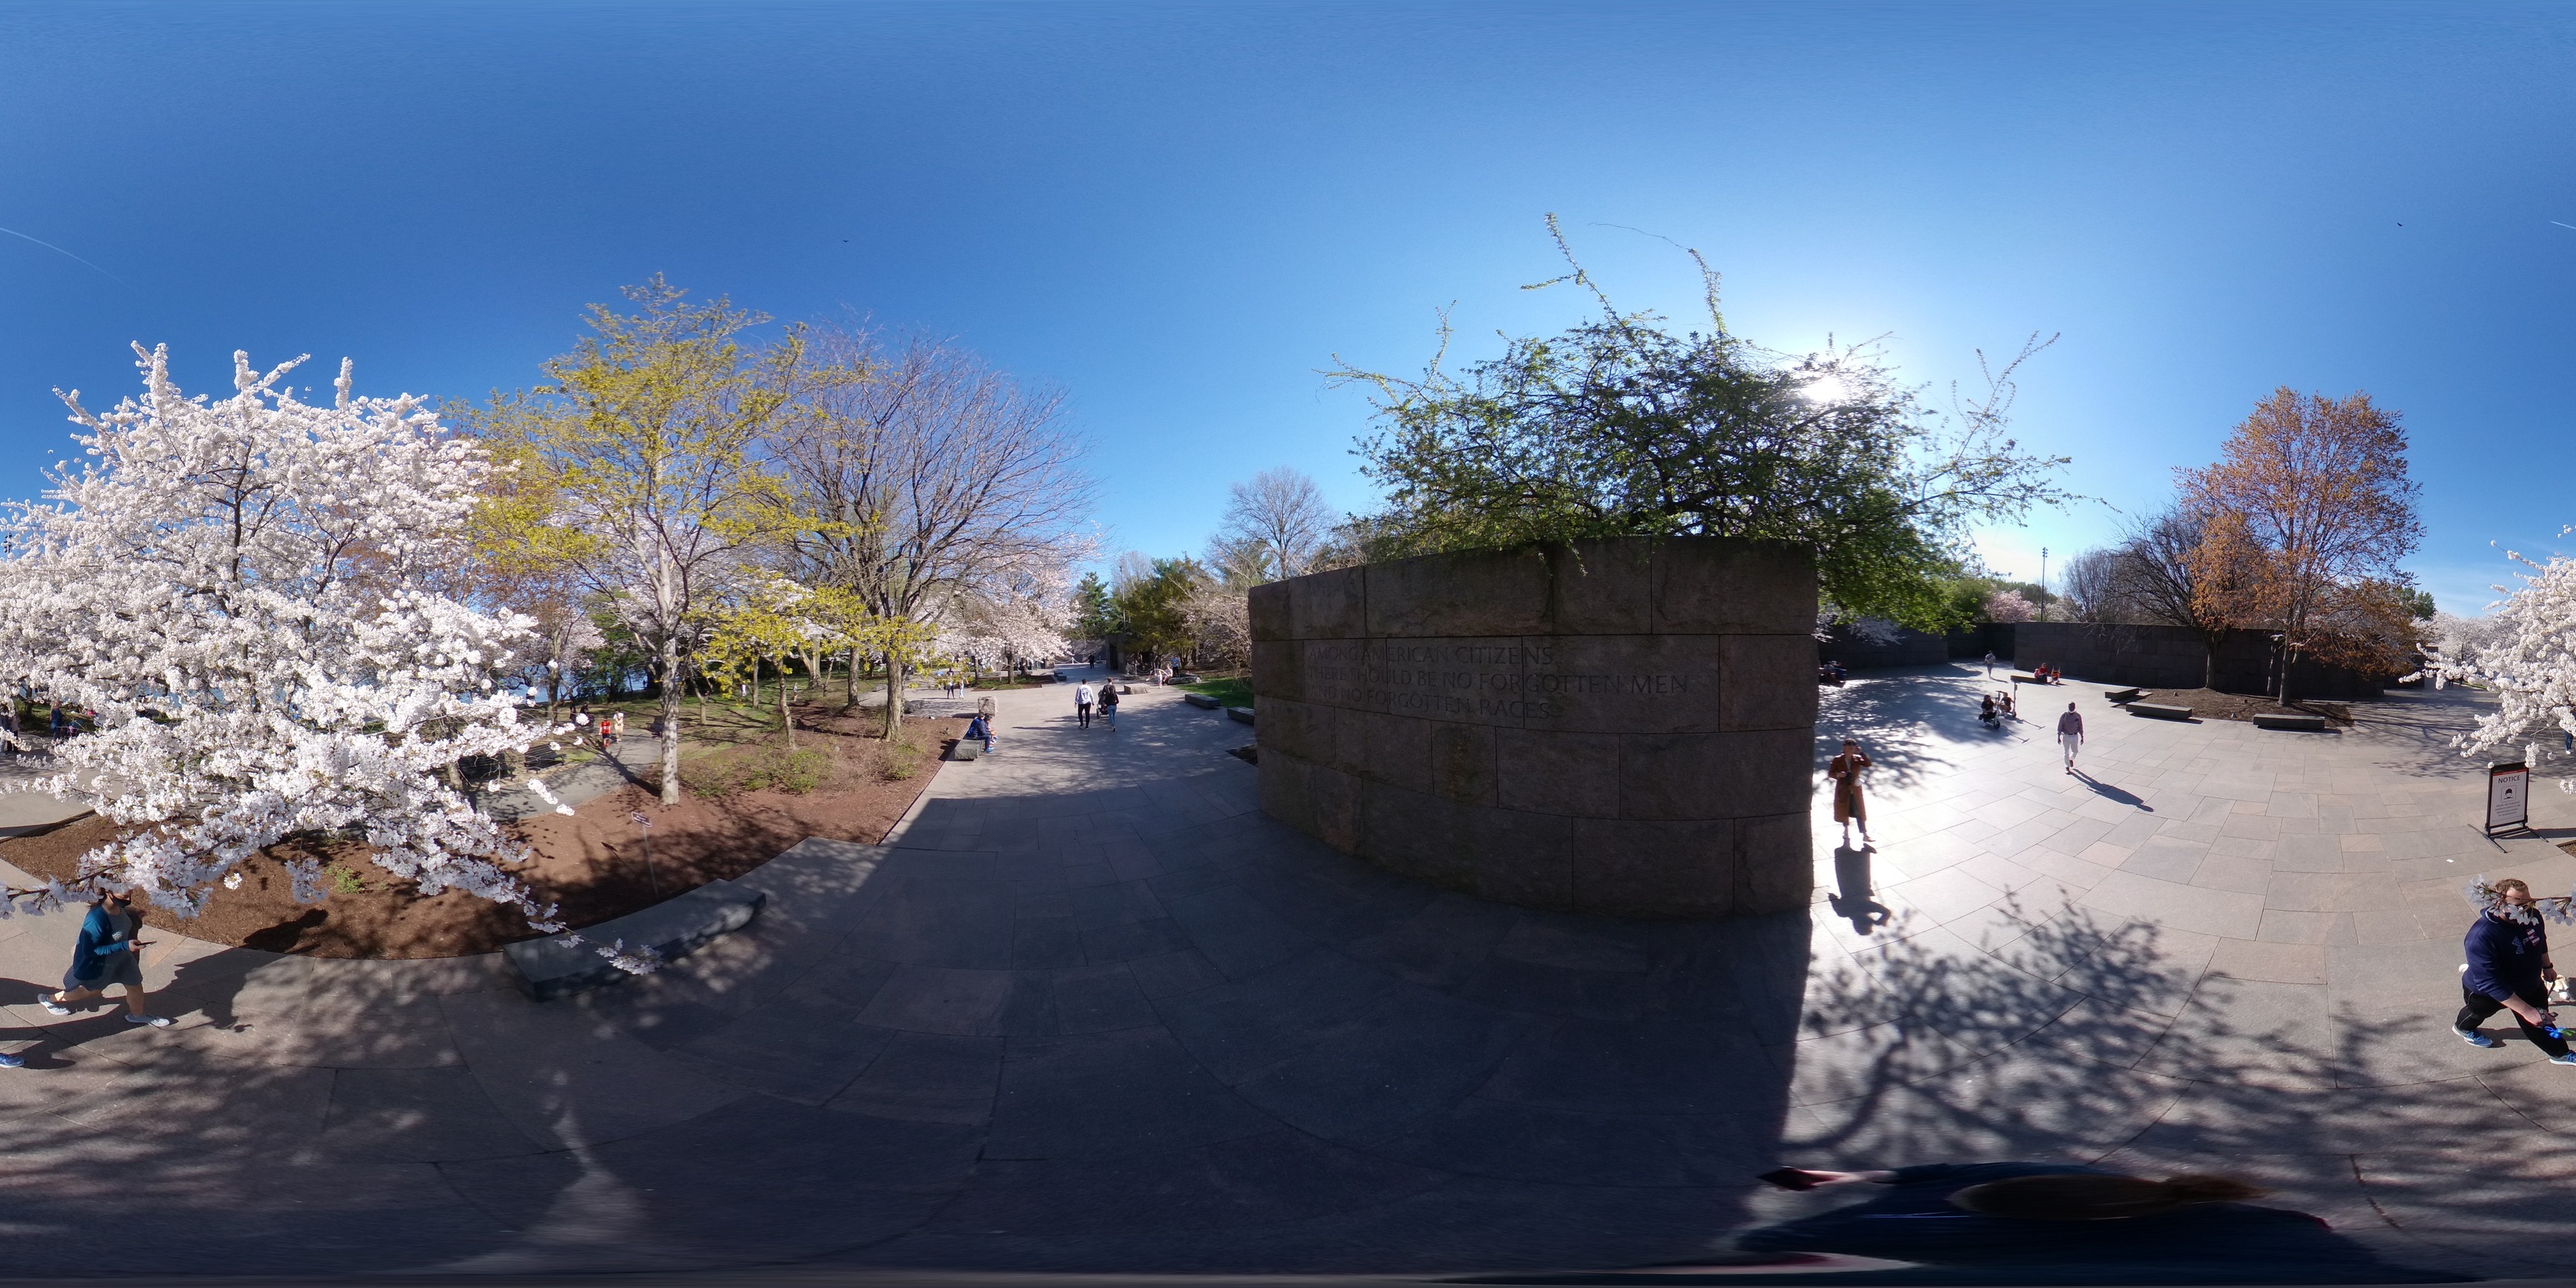 Spherical photo of people walking through a very long memorial plaza that includes stone walls with inscriptions of quotes and various trees. A cherry blossom tree is in full bloom. 